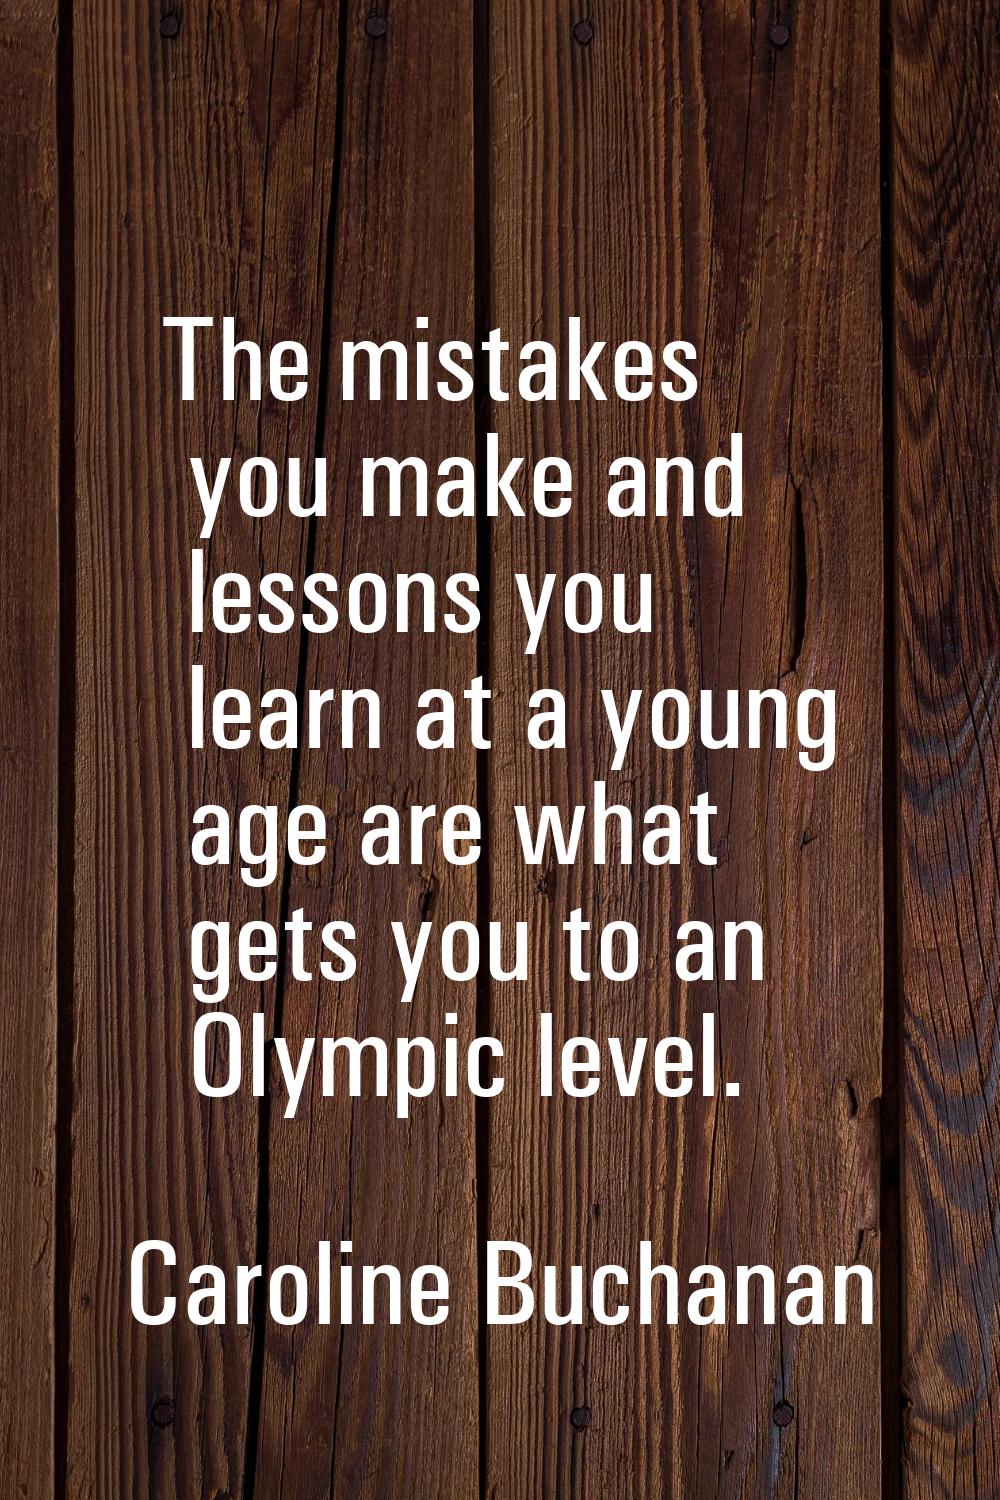 The mistakes you make and lessons you learn at a young age are what gets you to an Olympic level.